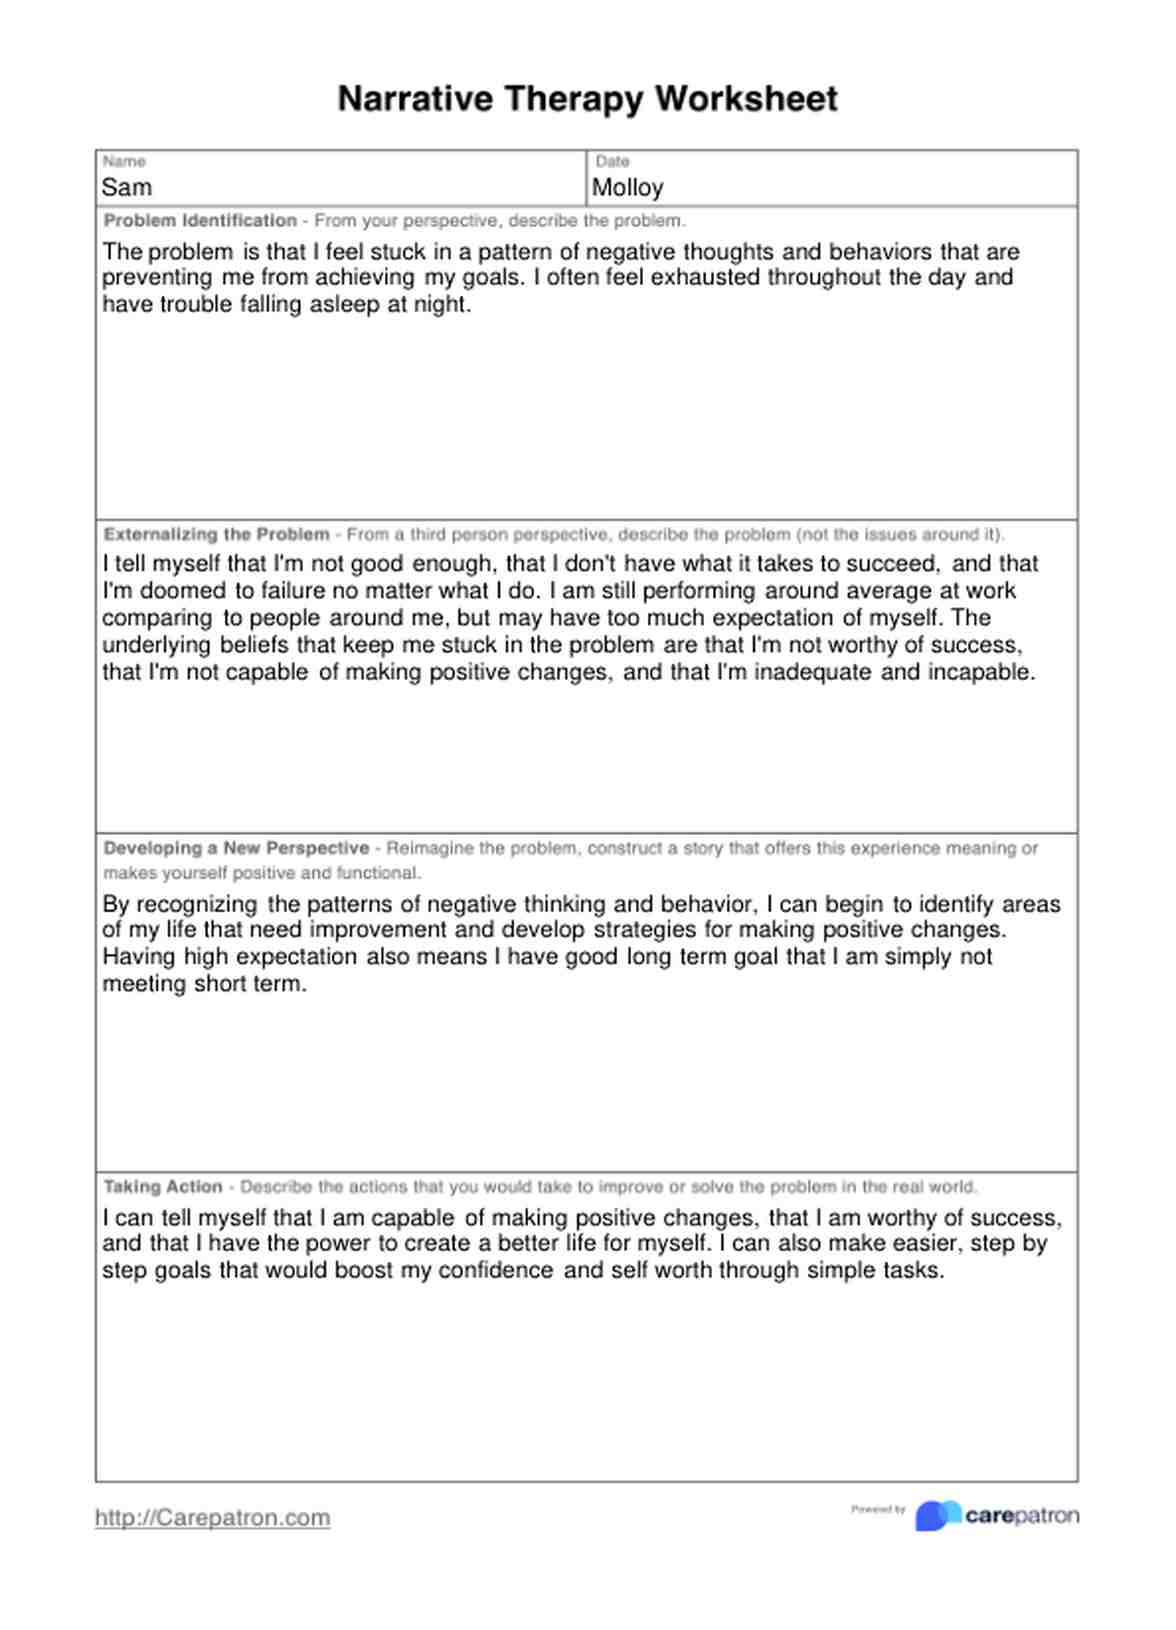 Narrative Therapy Worksheet PDF Example